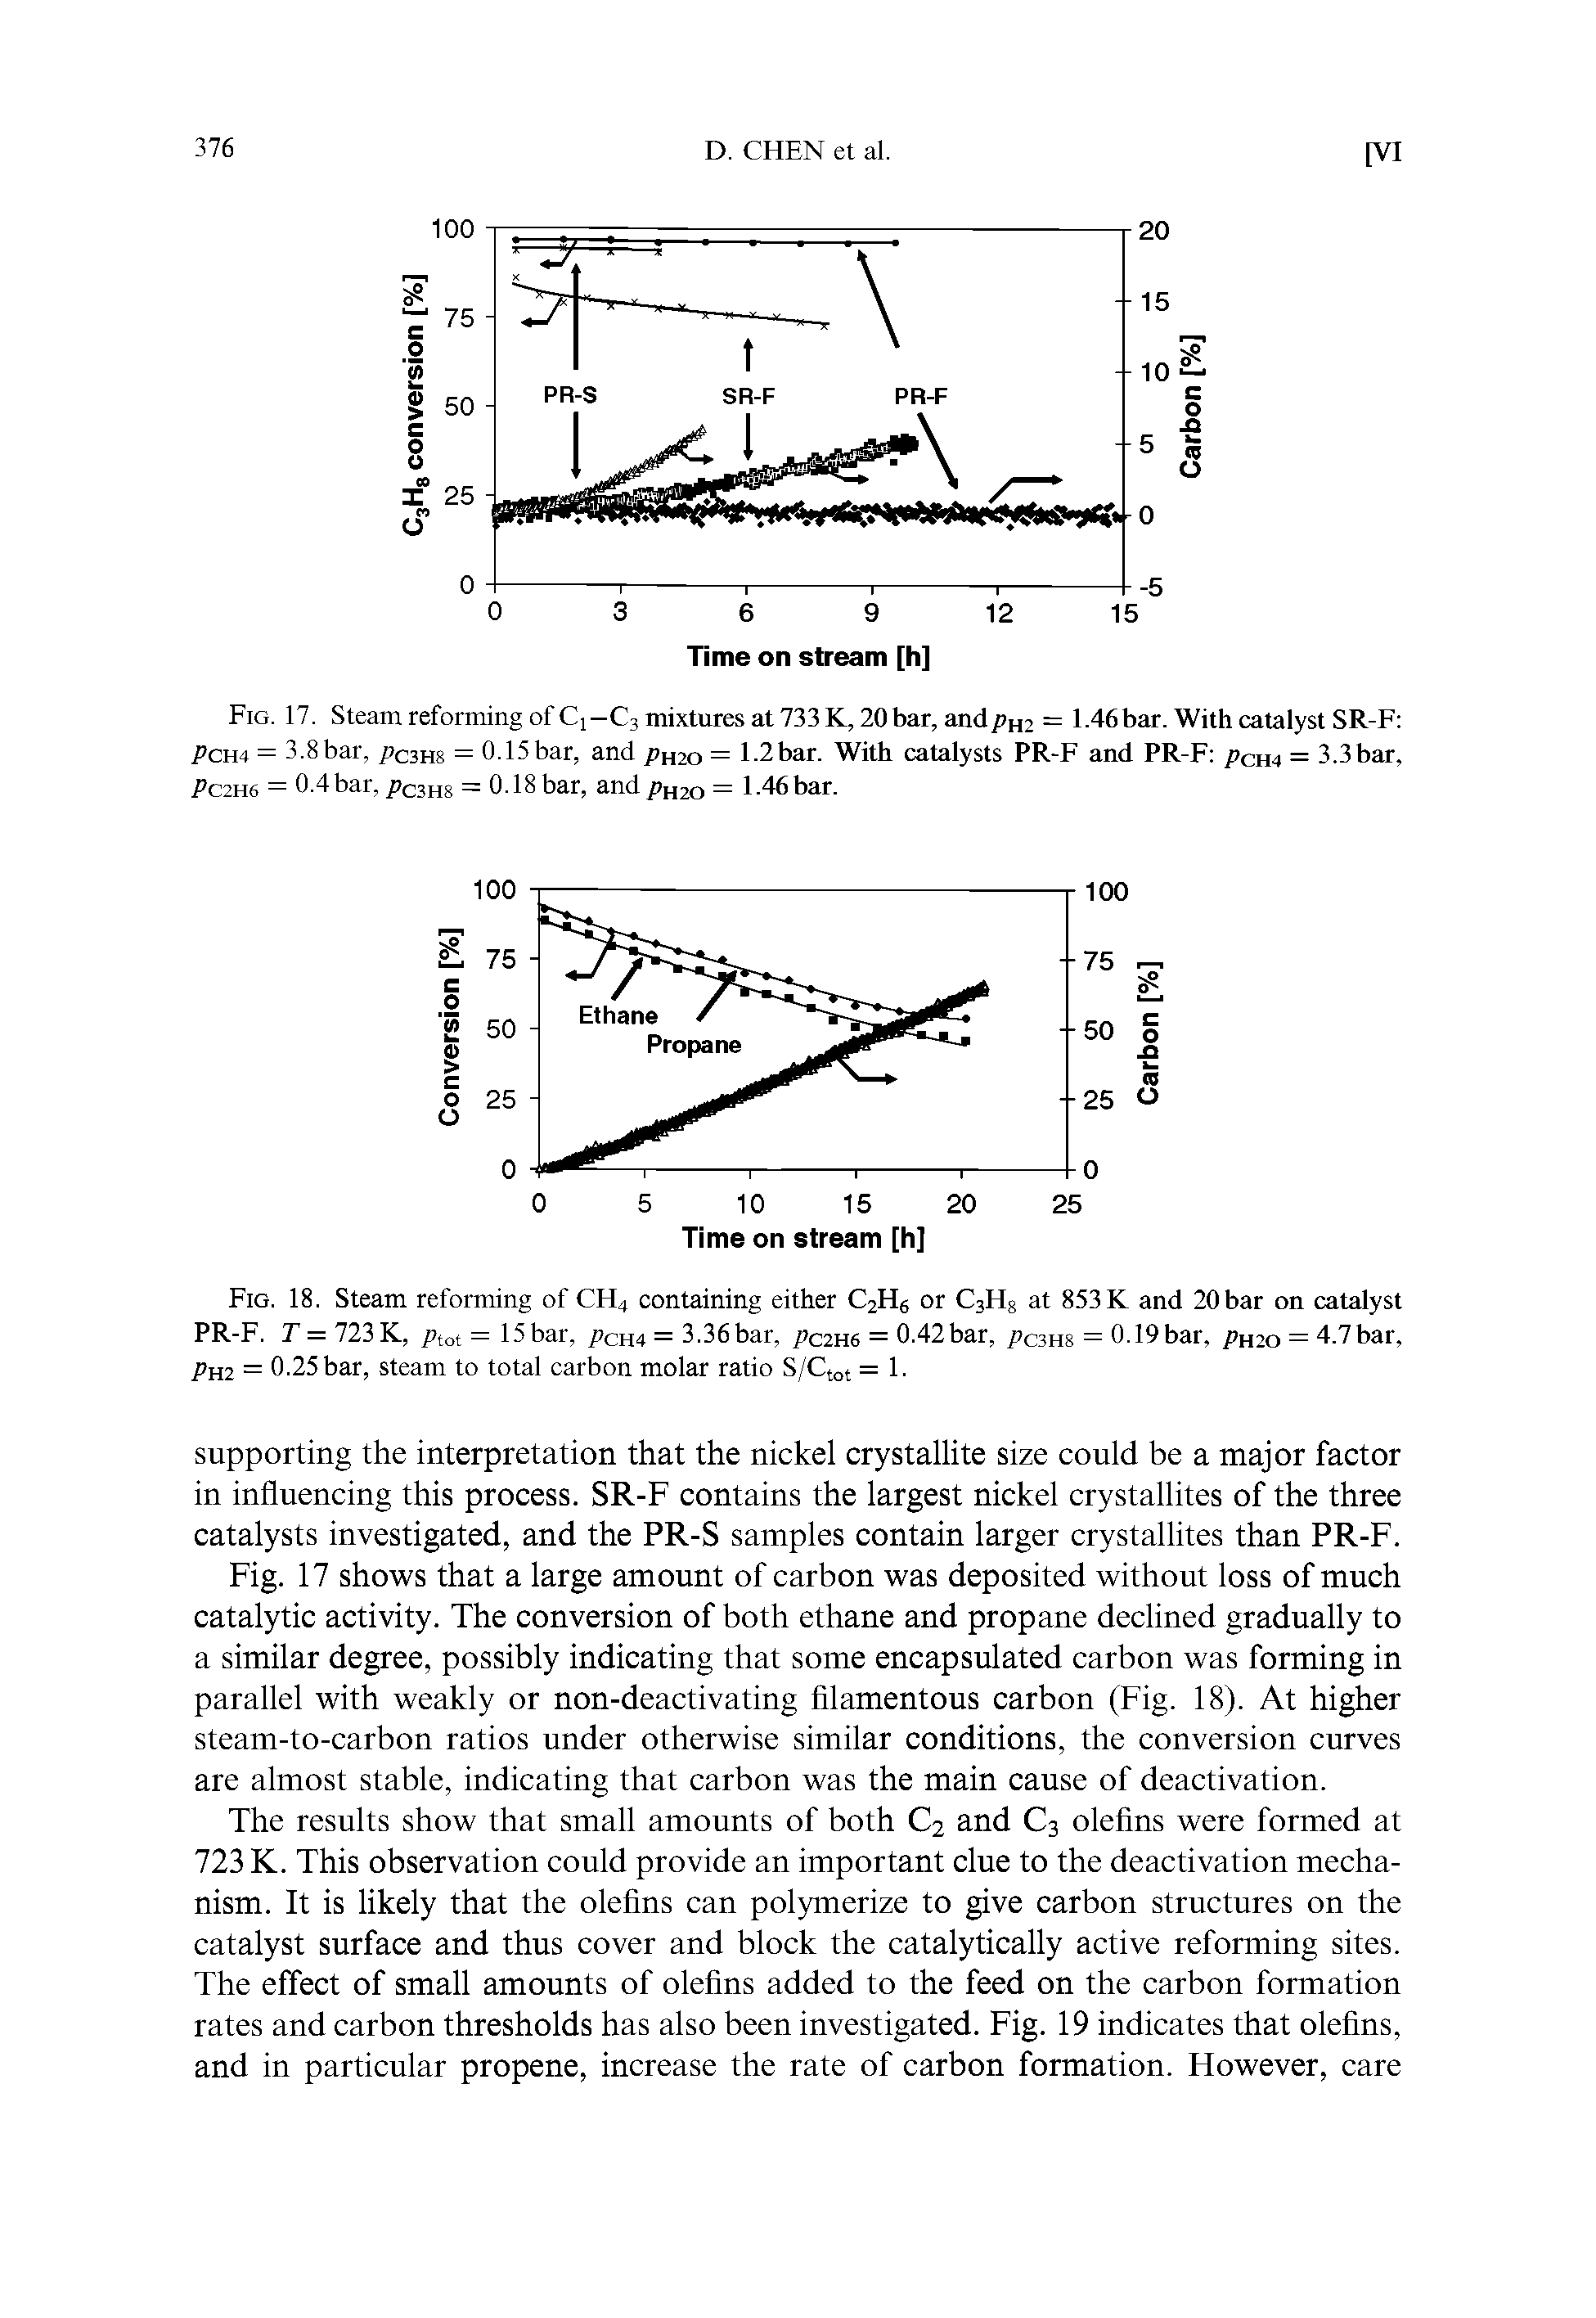 Fig. 17 shows that a large amount of carbon was deposited without loss of much catalytic activity. The conversion of both ethane and propane declined gradually to a similar degree, possibly indicating that some encapsulated carbon was forming in parallel with weakly or non-deactivating filamentous carbon (Fig. 18). At higher steam-to-carbon ratios under otherwise similar conditions, the conversion curves are almost stable, indicating that carbon was the main cause of deactivation.